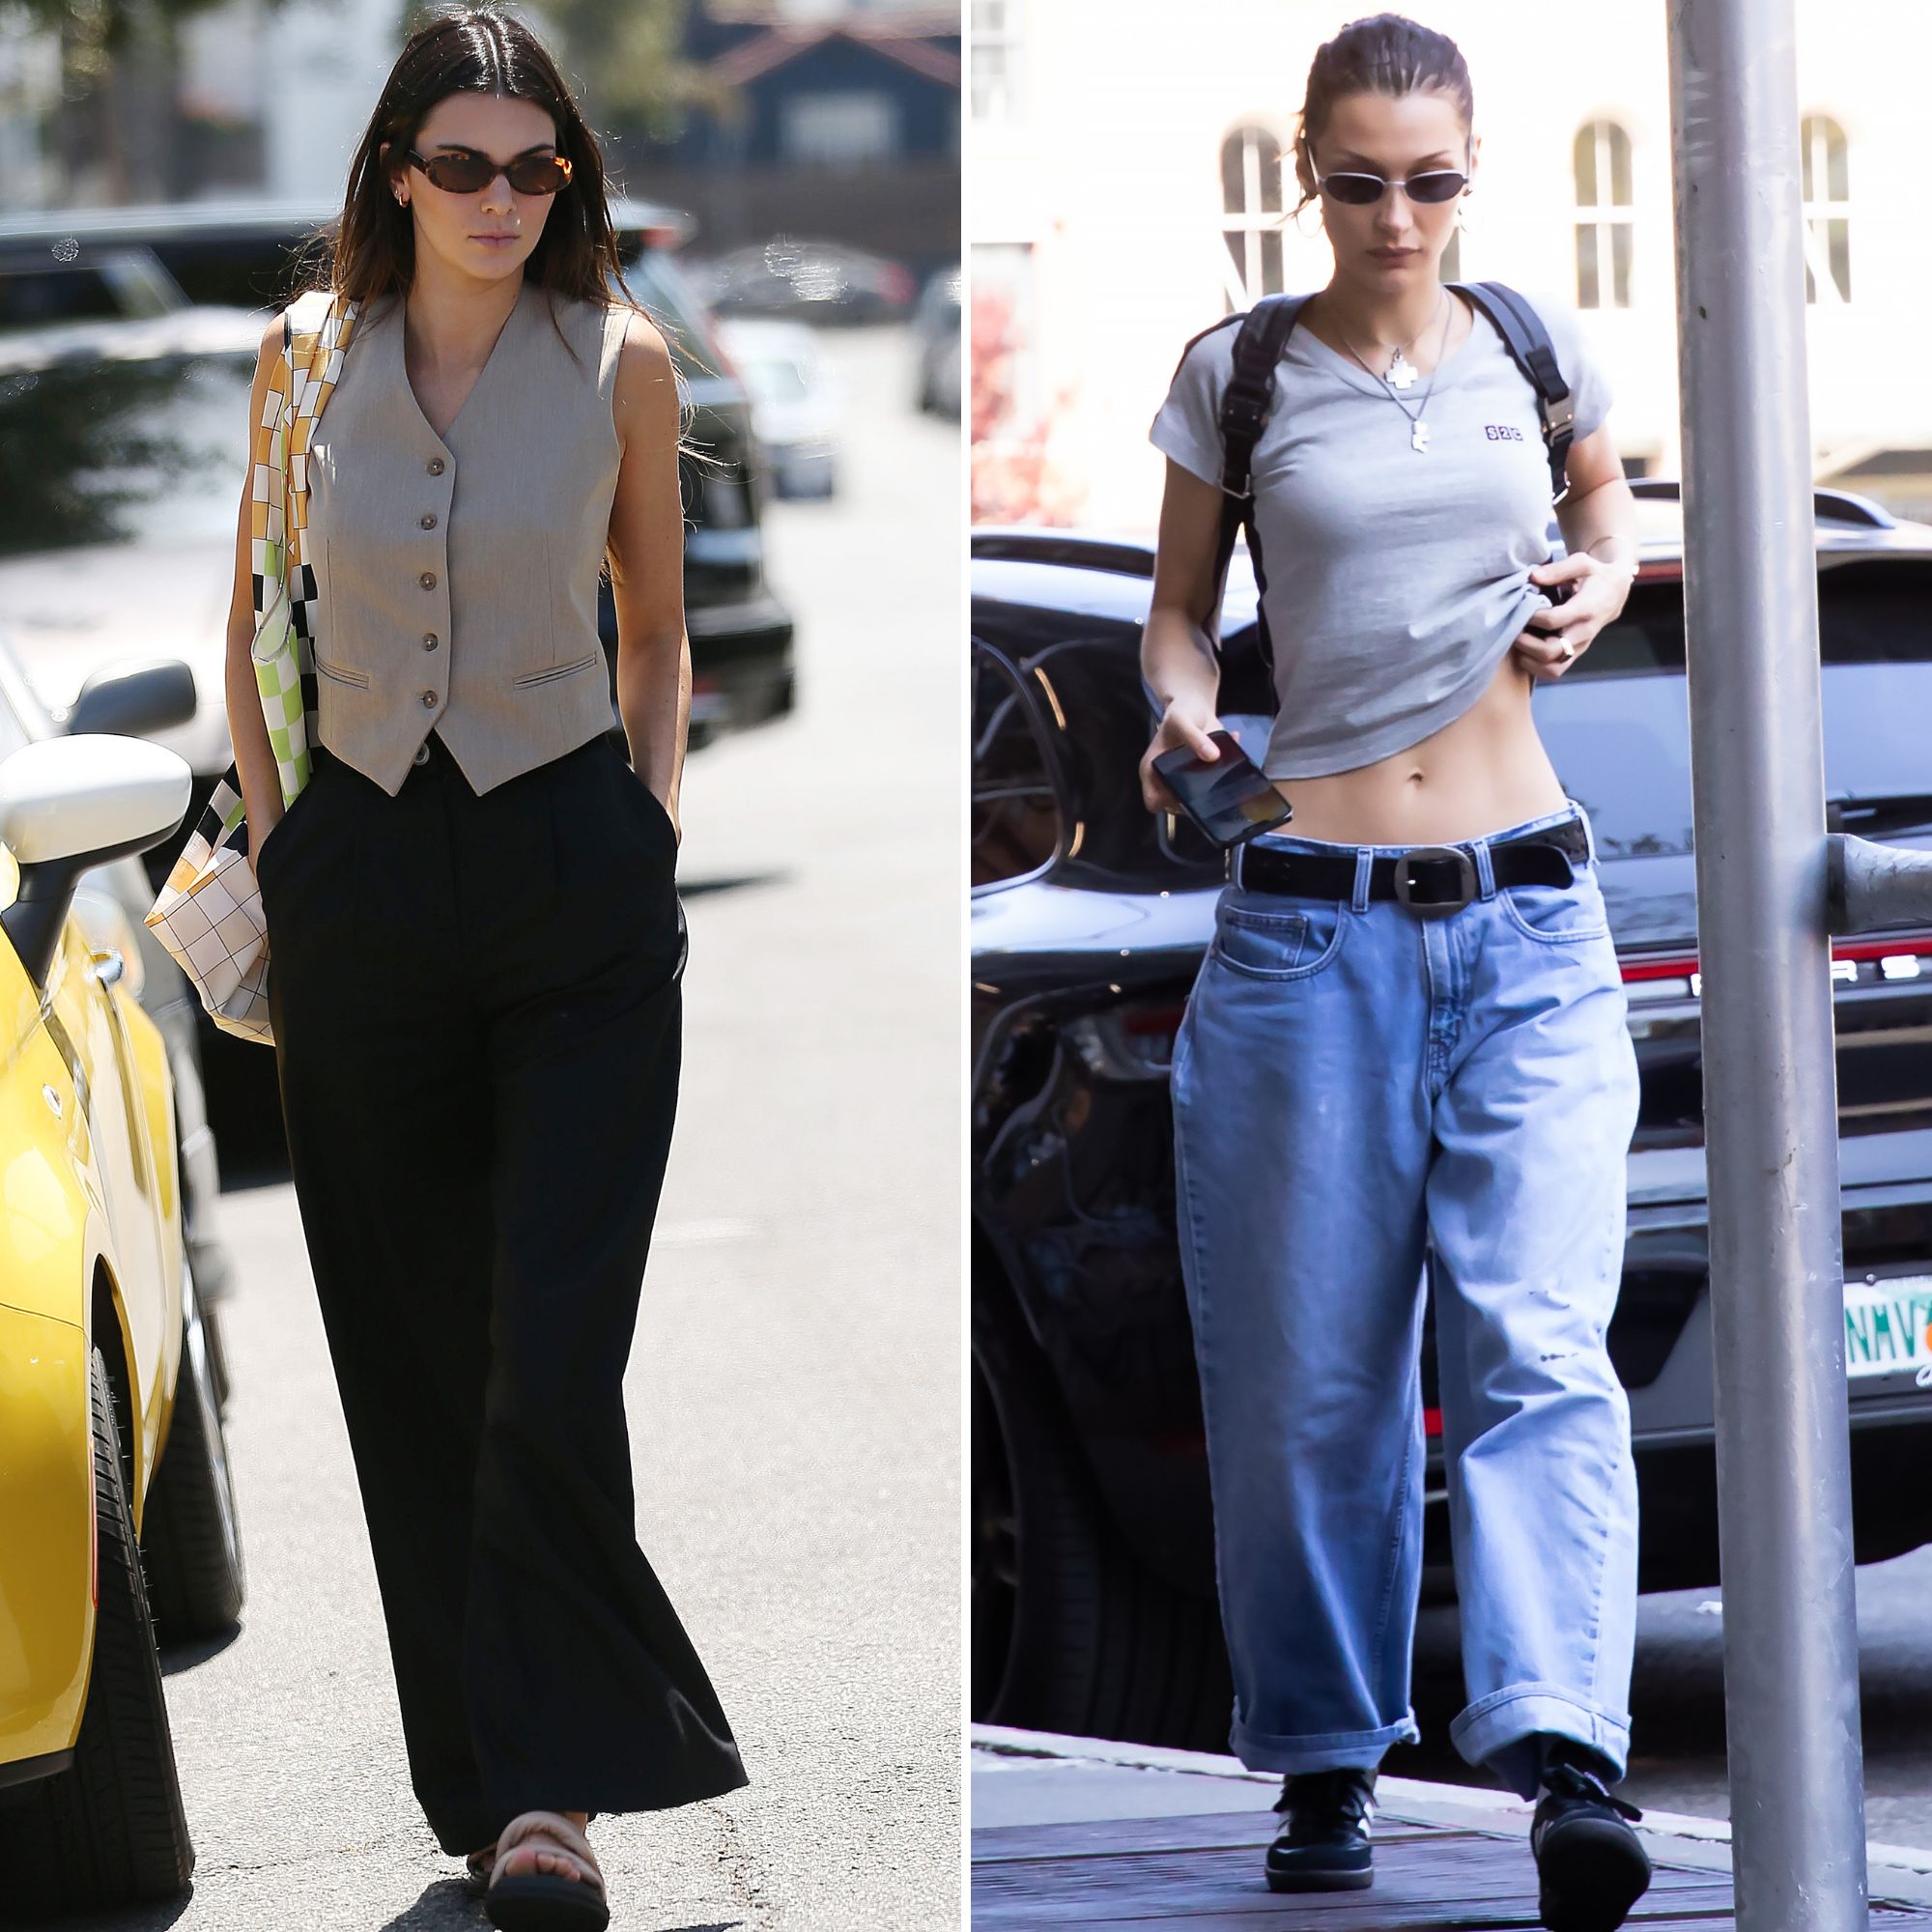 https://www.lifeandstylemag.com/wp-content/uploads/2022/06/celebs-wearing-baggy-pants.jpg?fit=2000%2C2000&quality=86&strip=all